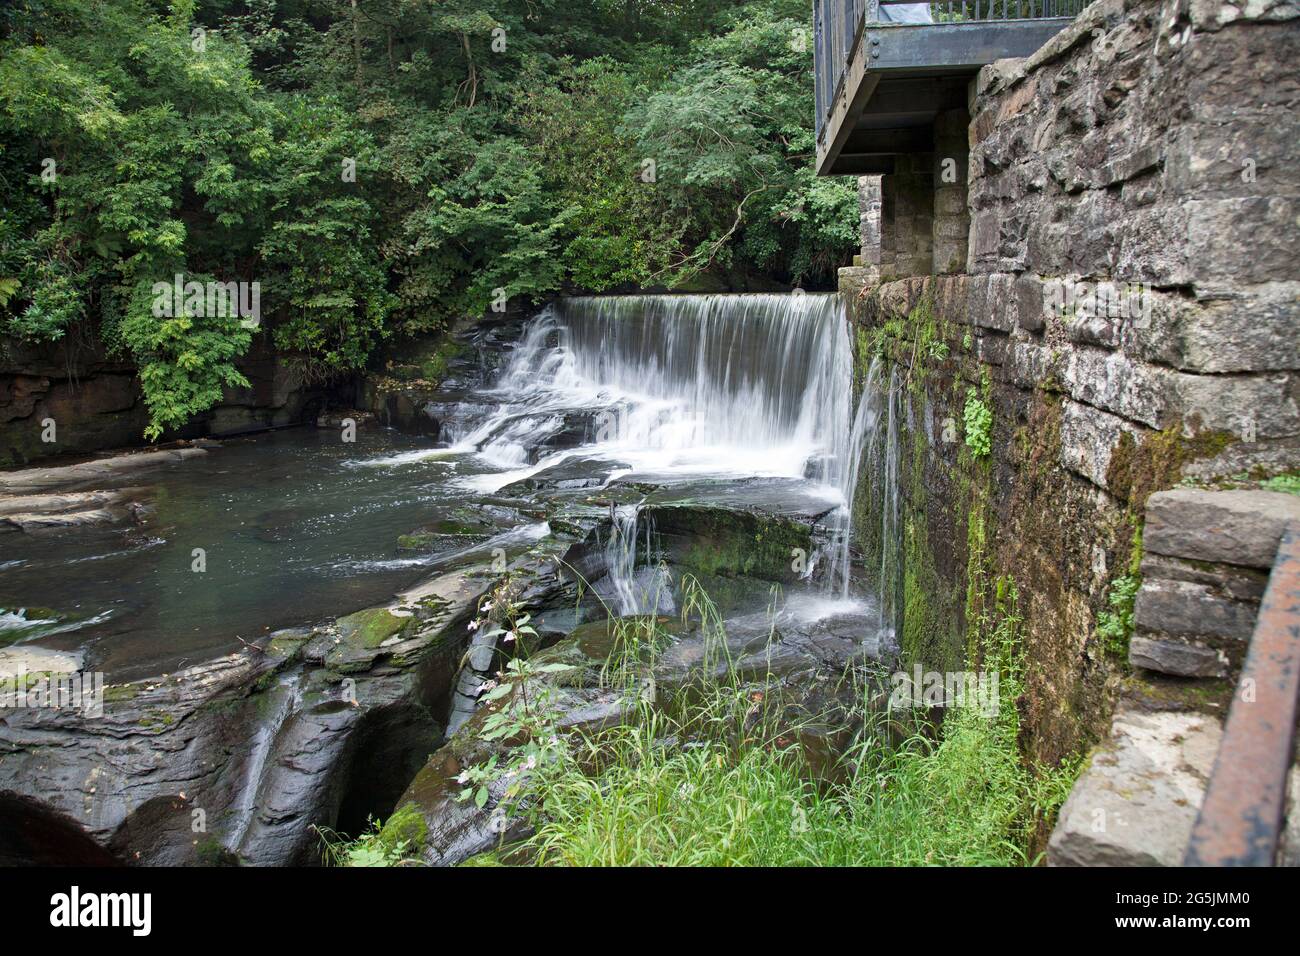 Water flowing over a man-made stone waterfall, or weir, being diverted away from Aberdulais waterwheel, Neath, Wales Stock Photo